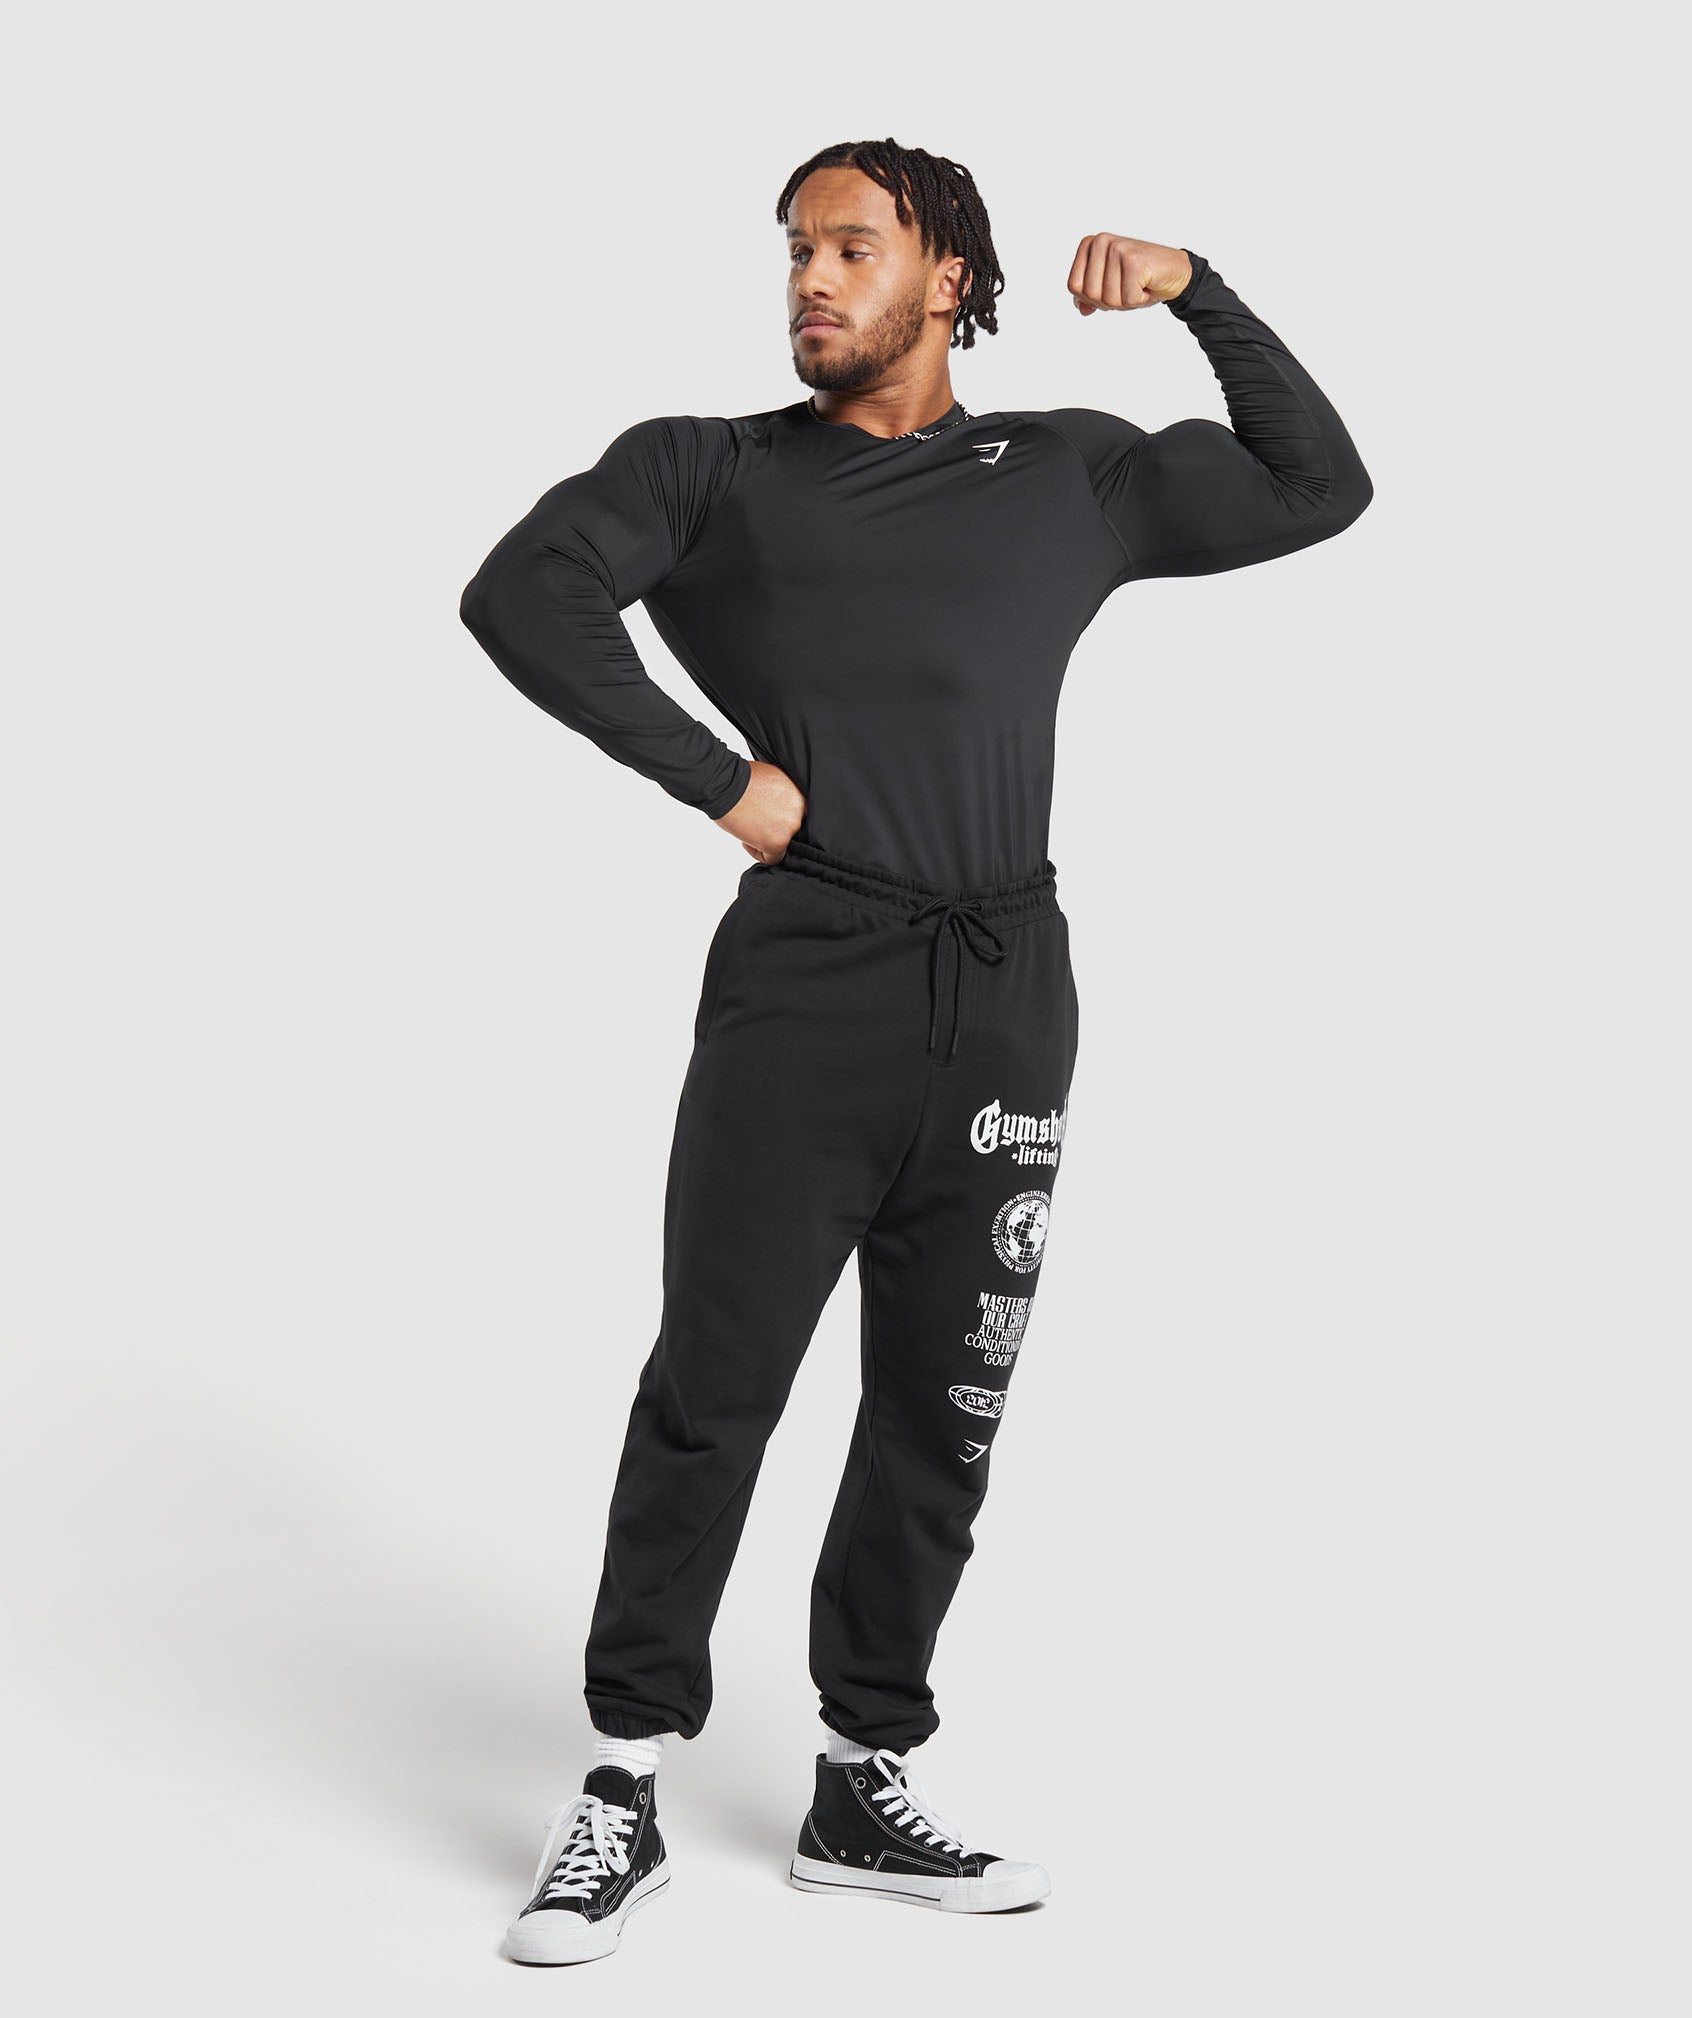 Element Baselayer Long Sleeve T-Shirt in Black - view 4